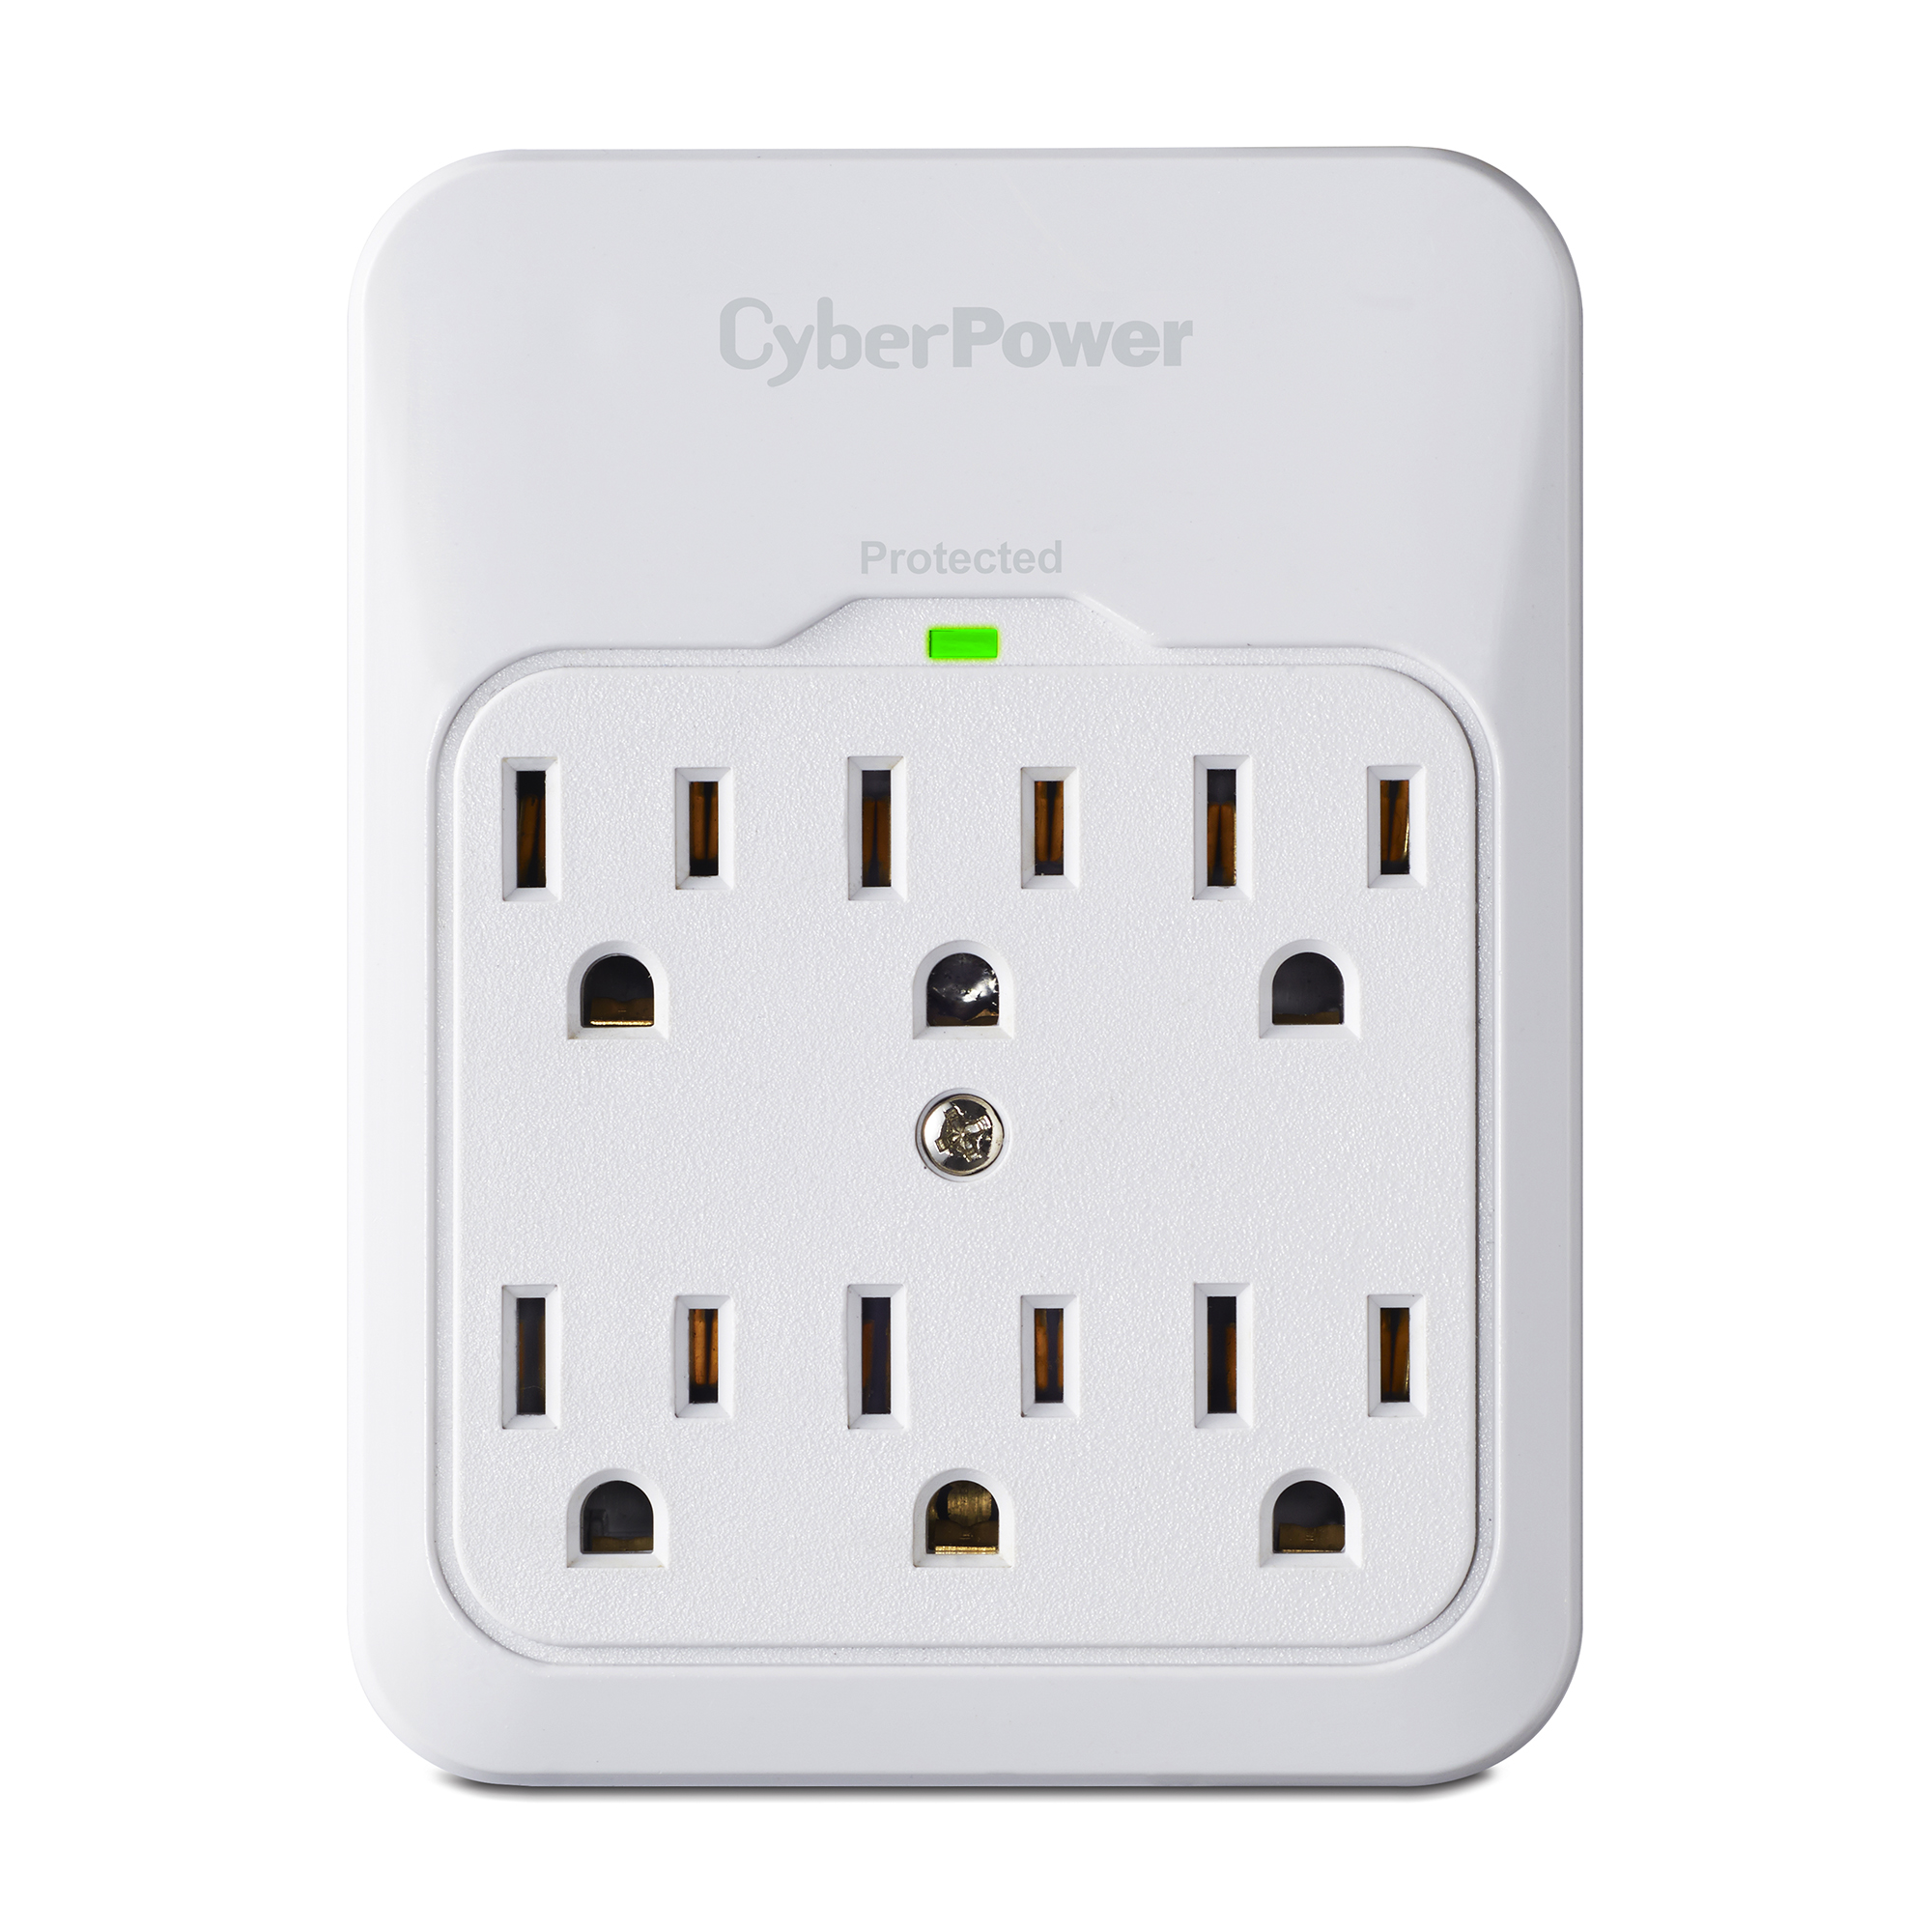 CyberPower  1500 J 2 outlets Surge Protector Wall Tap 